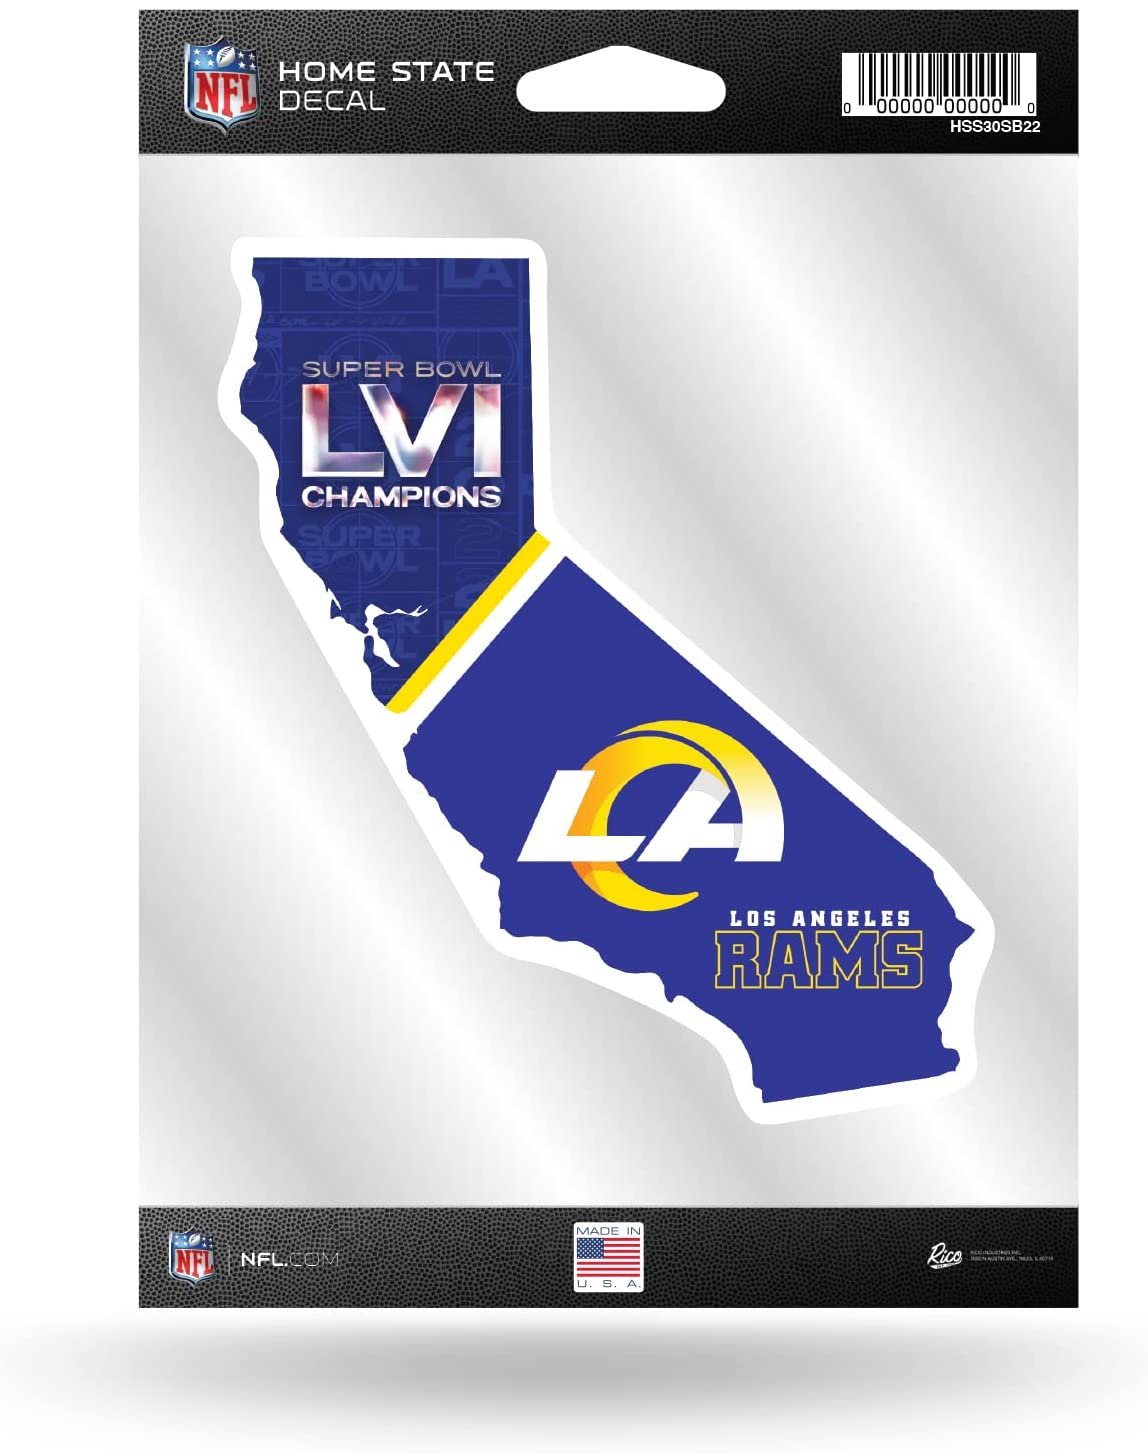 Los Angeles Rams Super Bowl LVI Champions 5 Inch Sticker Decal, Home State Design, Flat Vinyl, Full Adhesive Backing